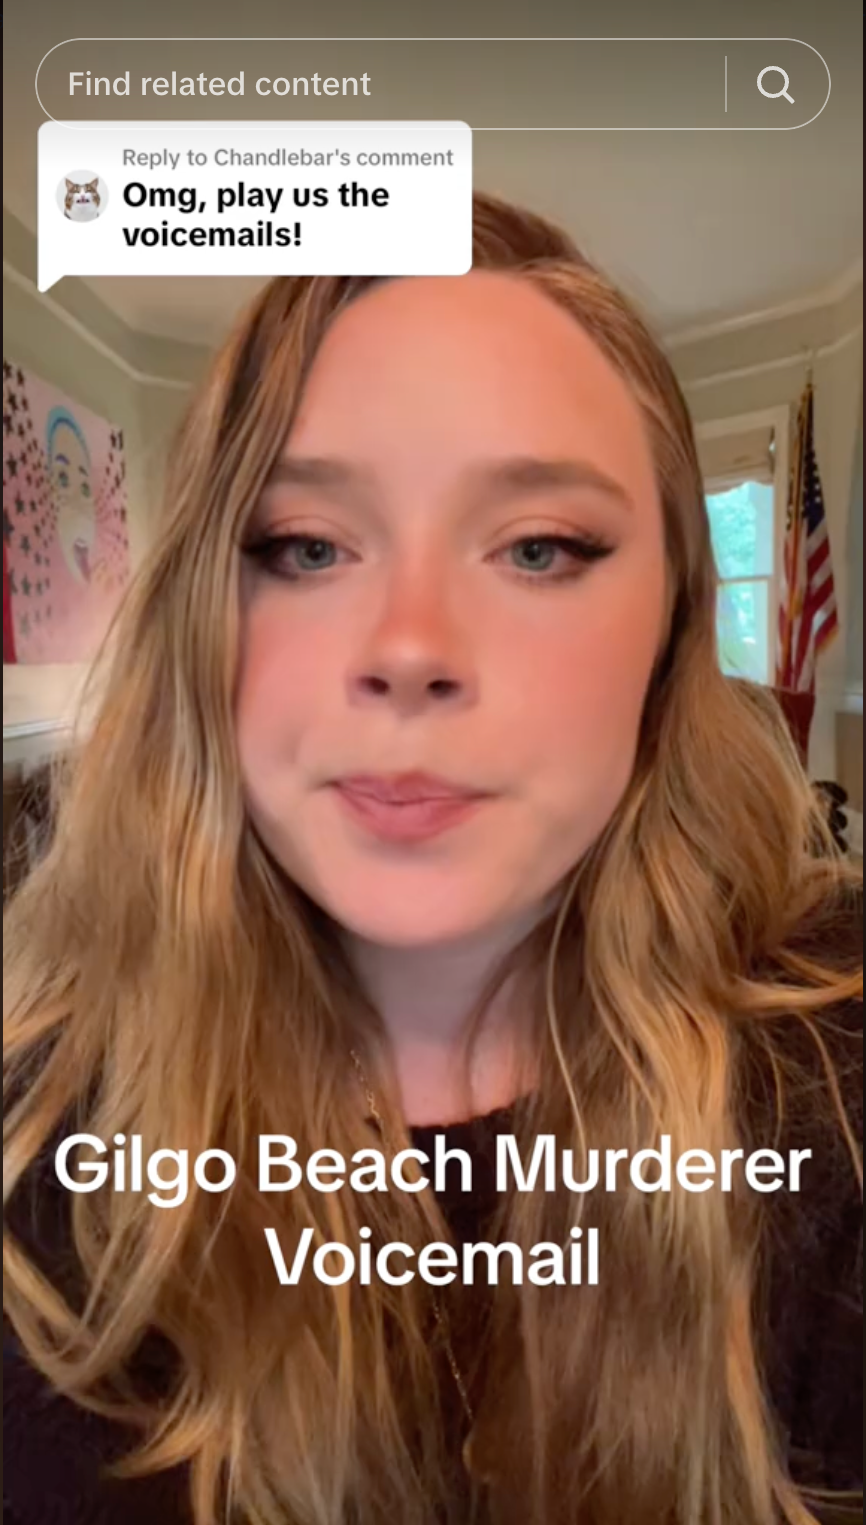 Young Woman Reveals She Was Almost Gilgo Beach Murder Victim